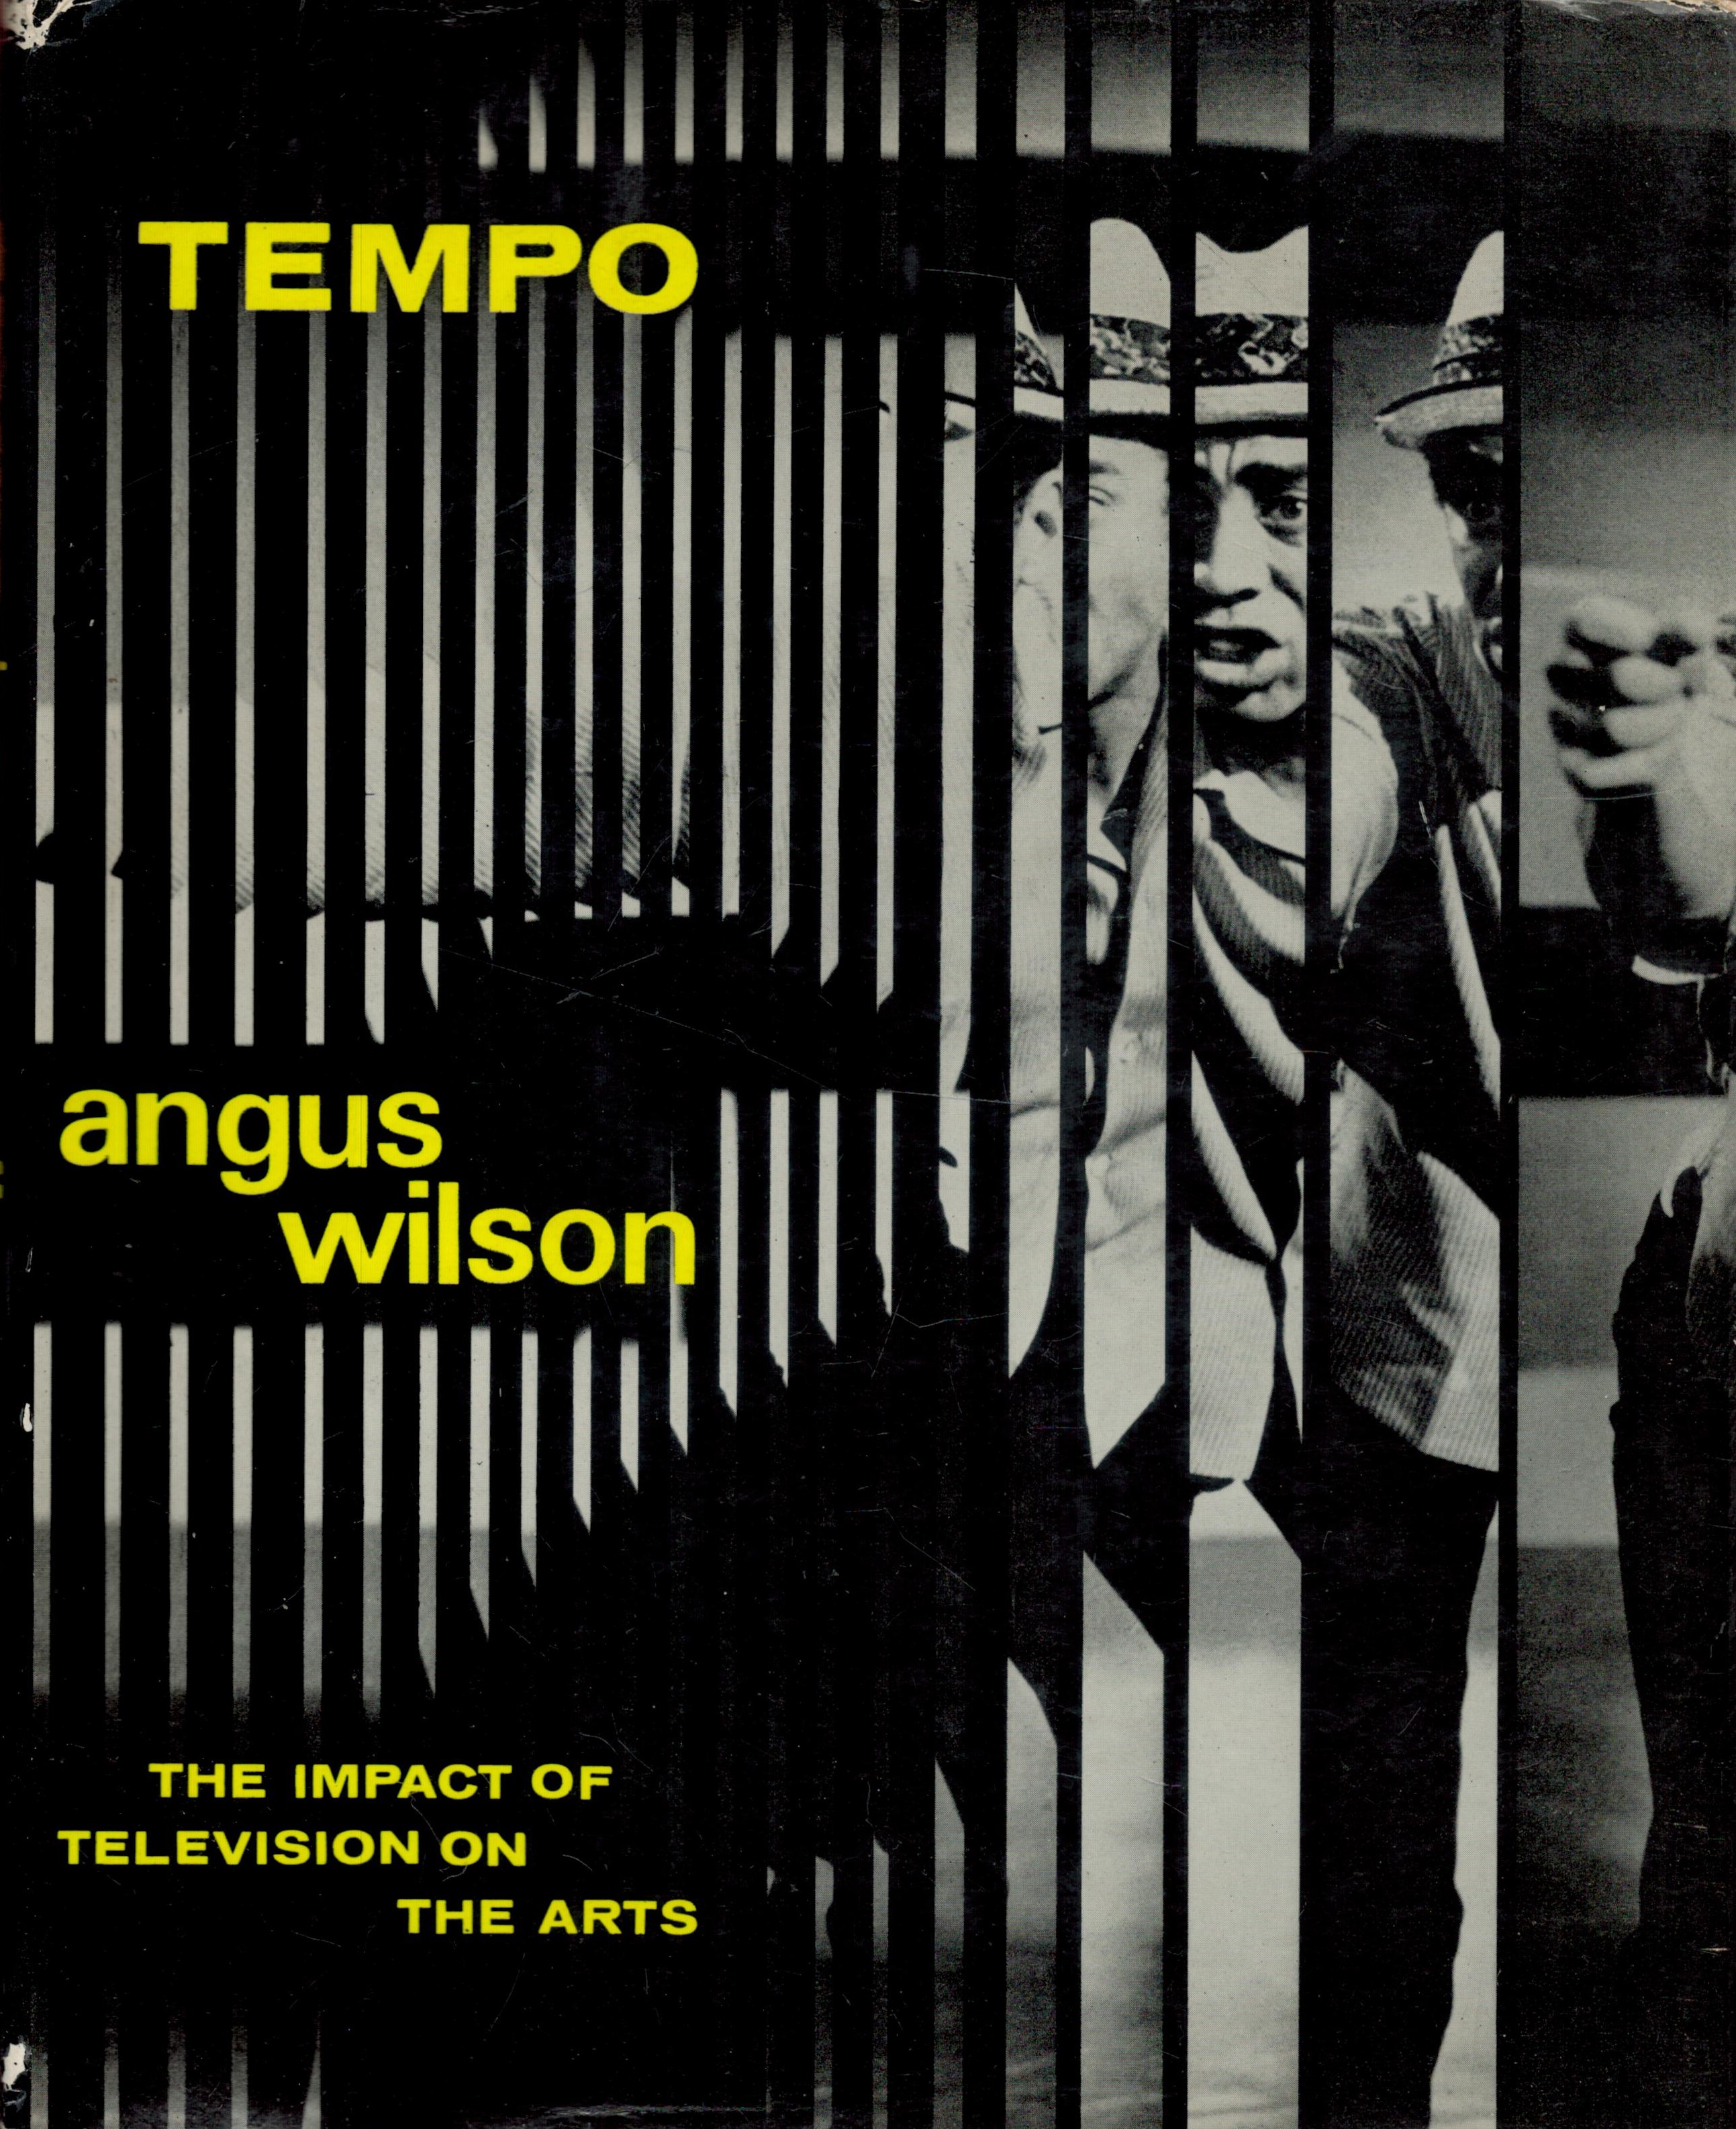 Tempo by Angus Wilson. The Impact of Television On the Arts. Published by Studio Vista. 1st